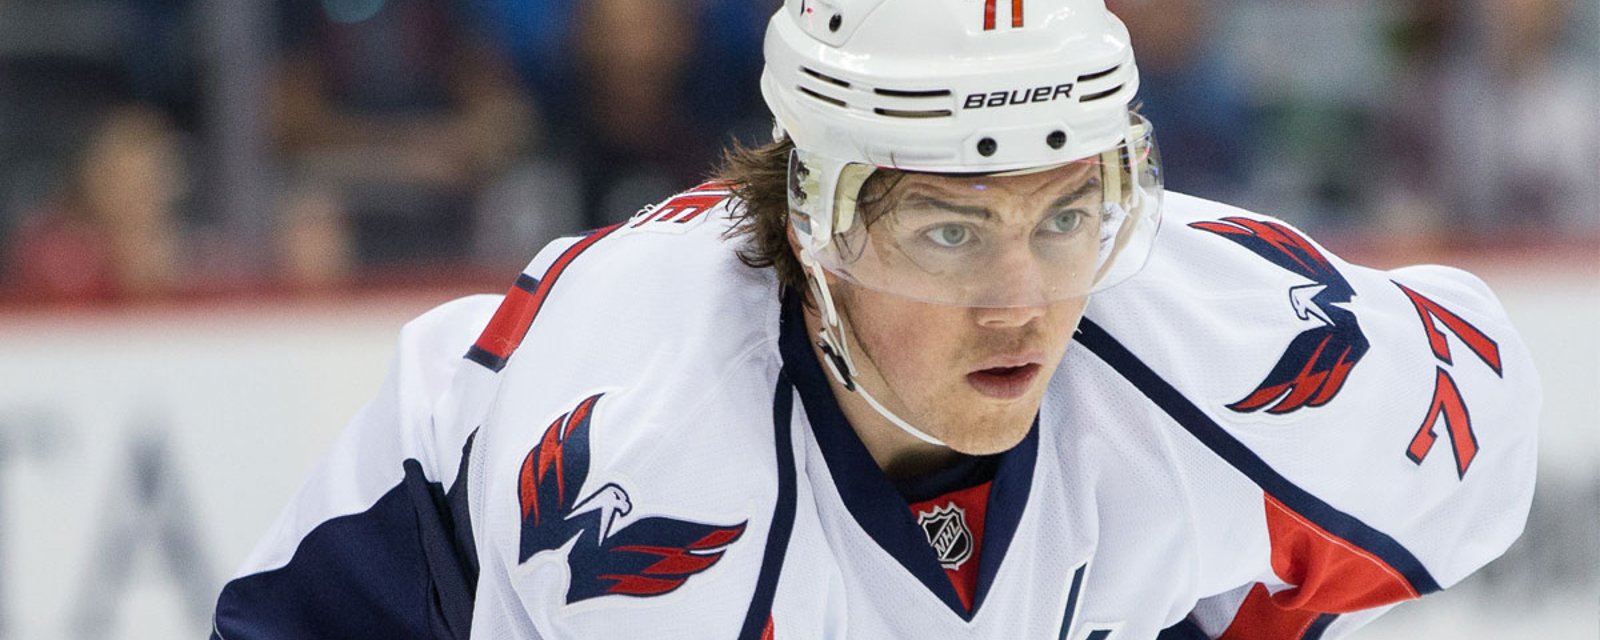 Report: T.J. Oshie set up for failure in 2017-18